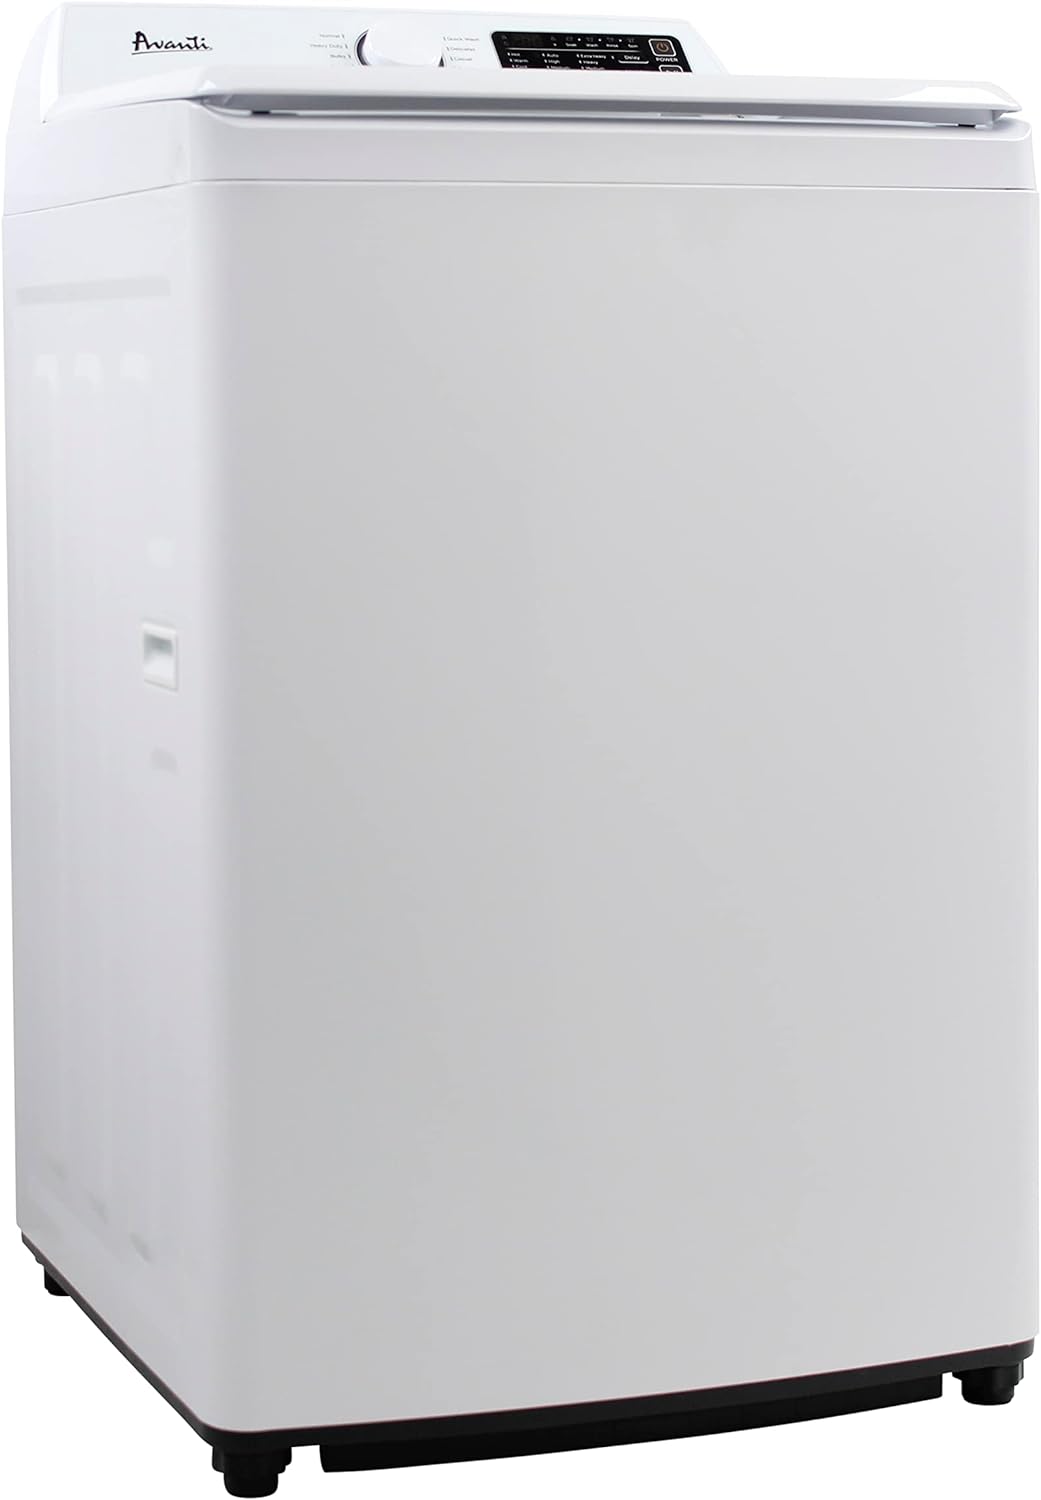 Avanti 25 in. 3.7 cu. ft. Compact Top Load Washer with Agitator (White) $389.96 - Shipping Varies